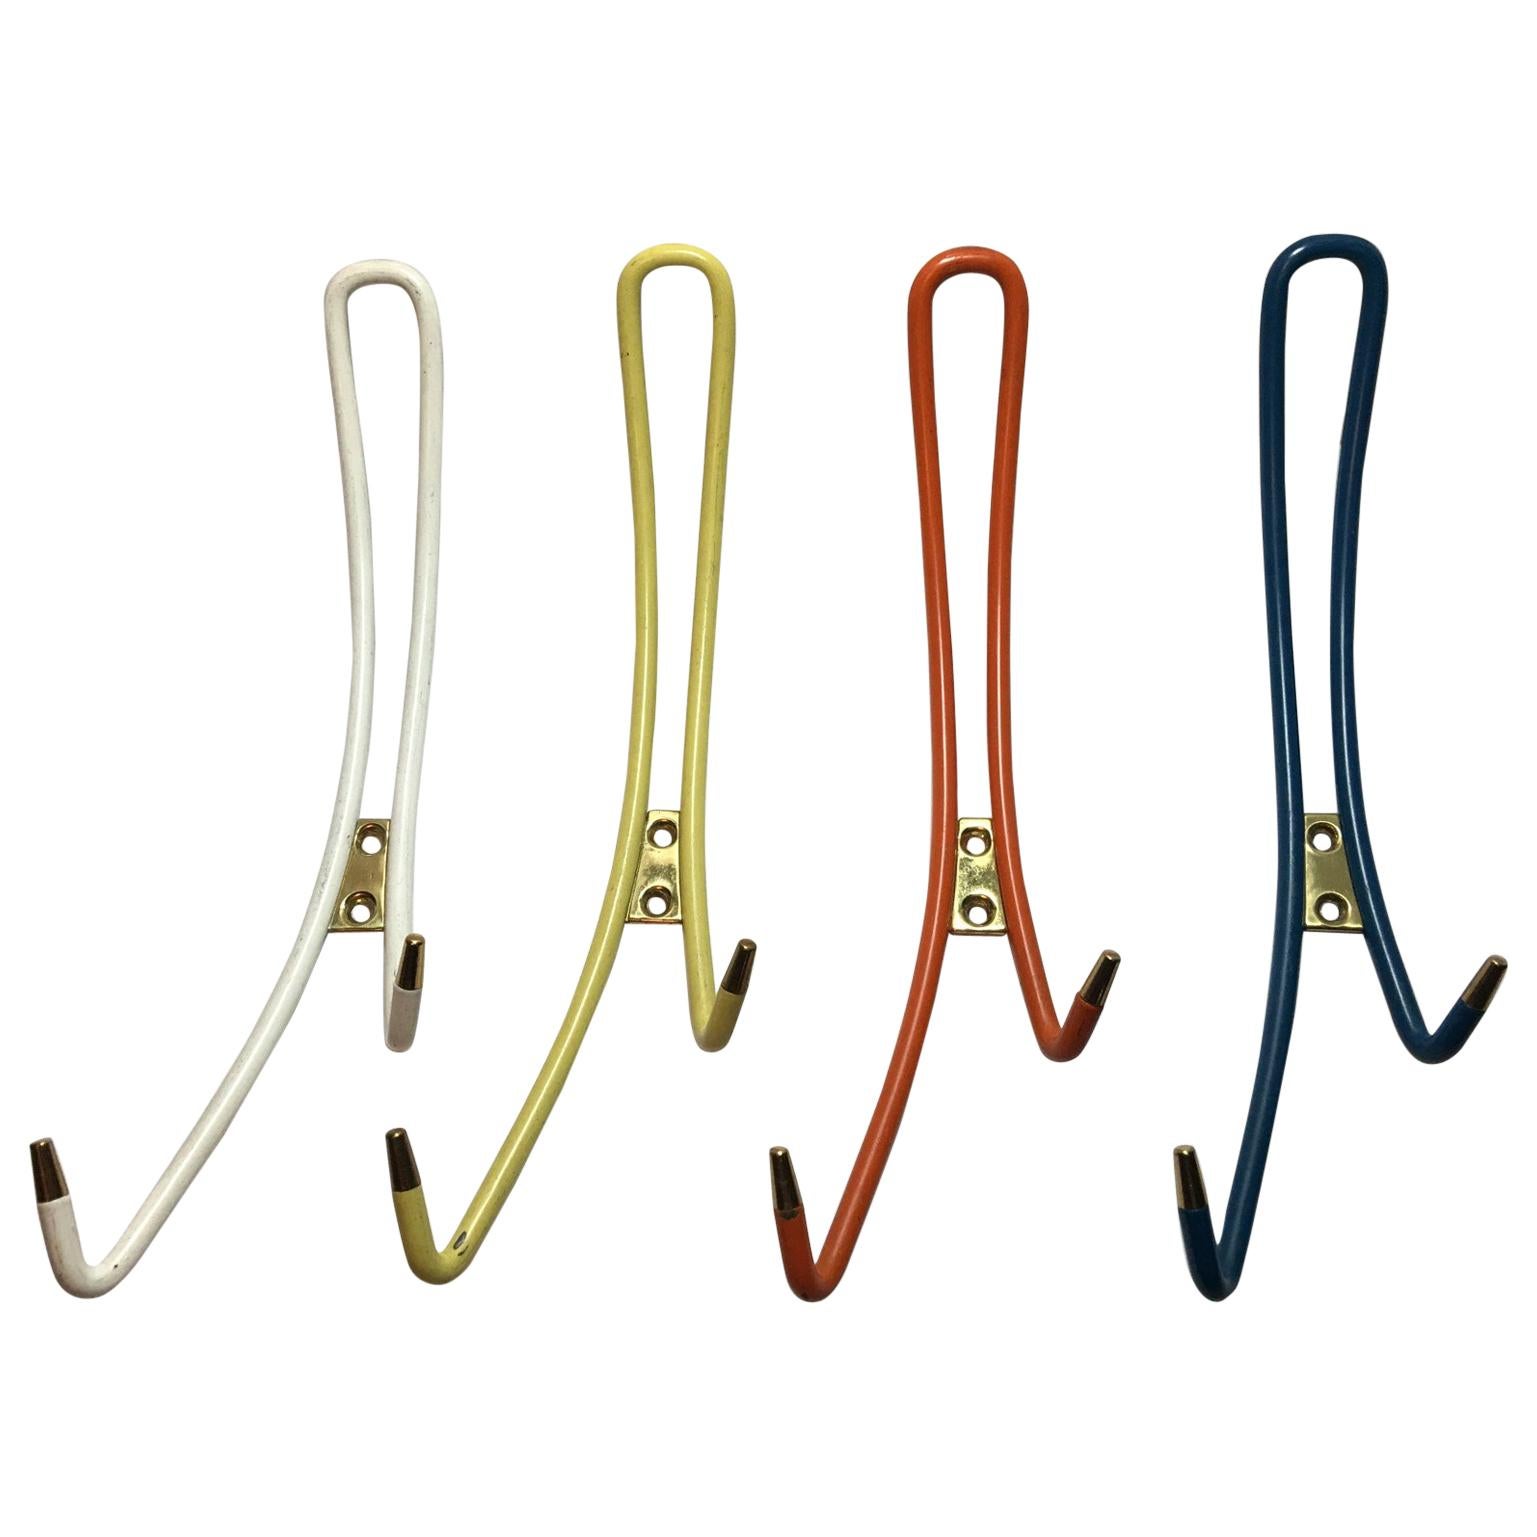 Four Rare "Sputnik Era" Clothes Hooks from the 1960s For Sale